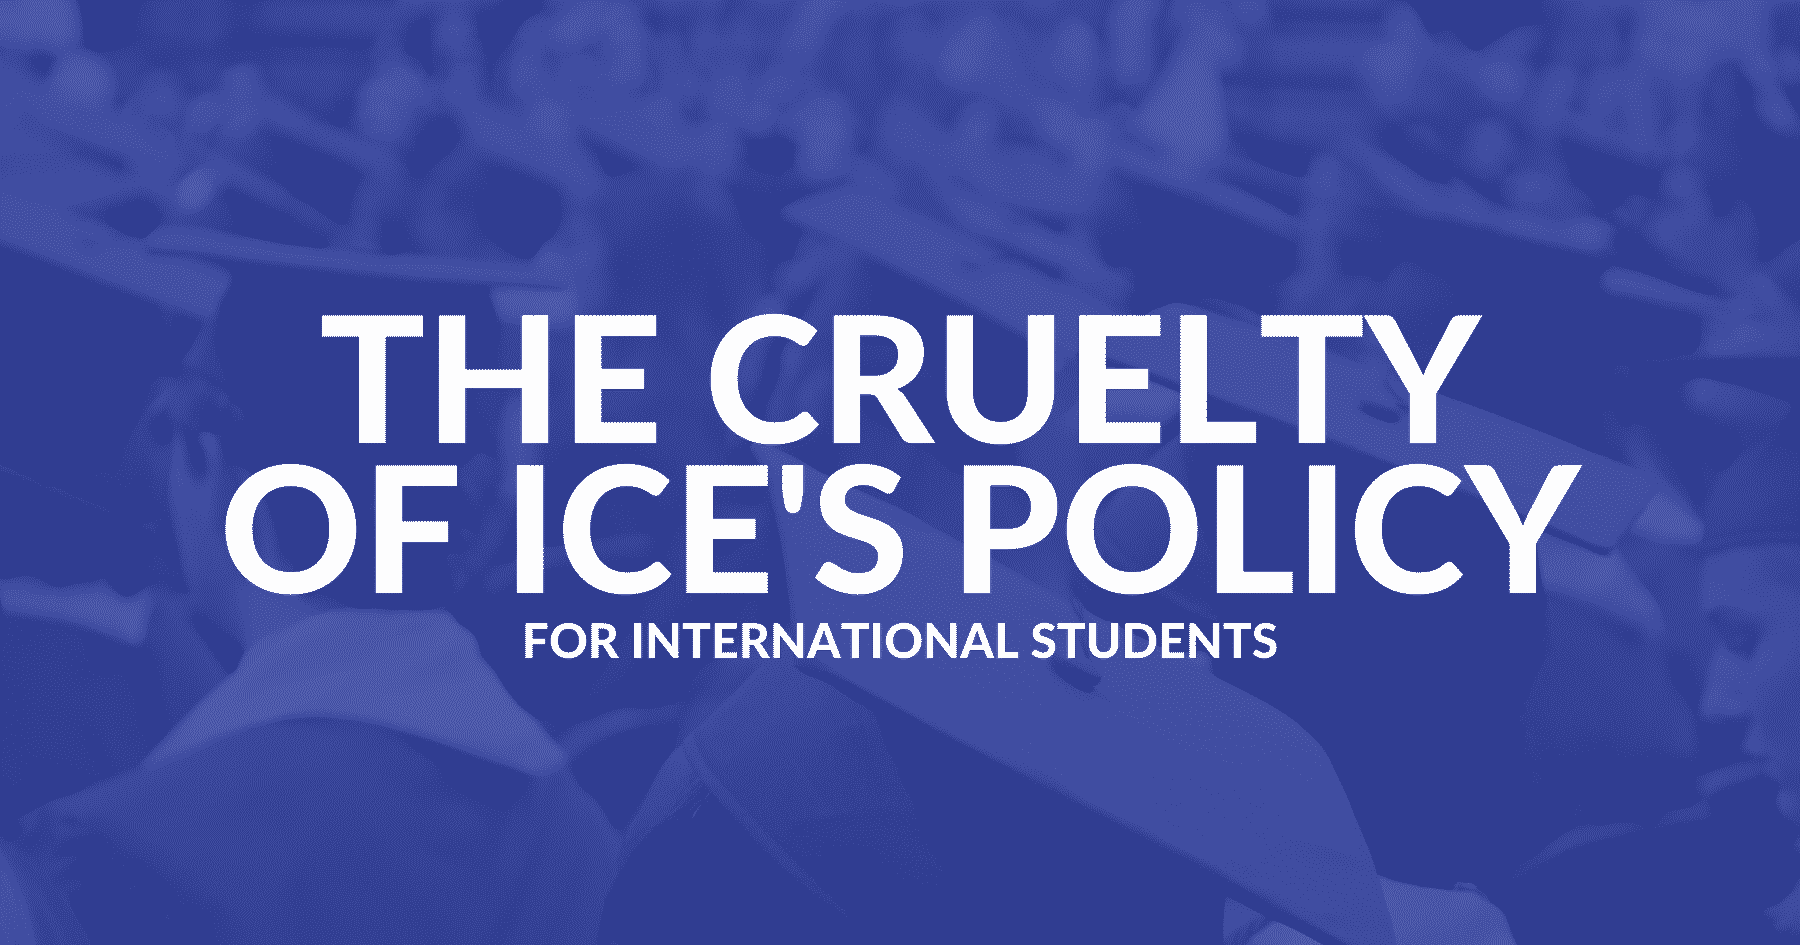 The Cruelty of ICE's Policy for International Students